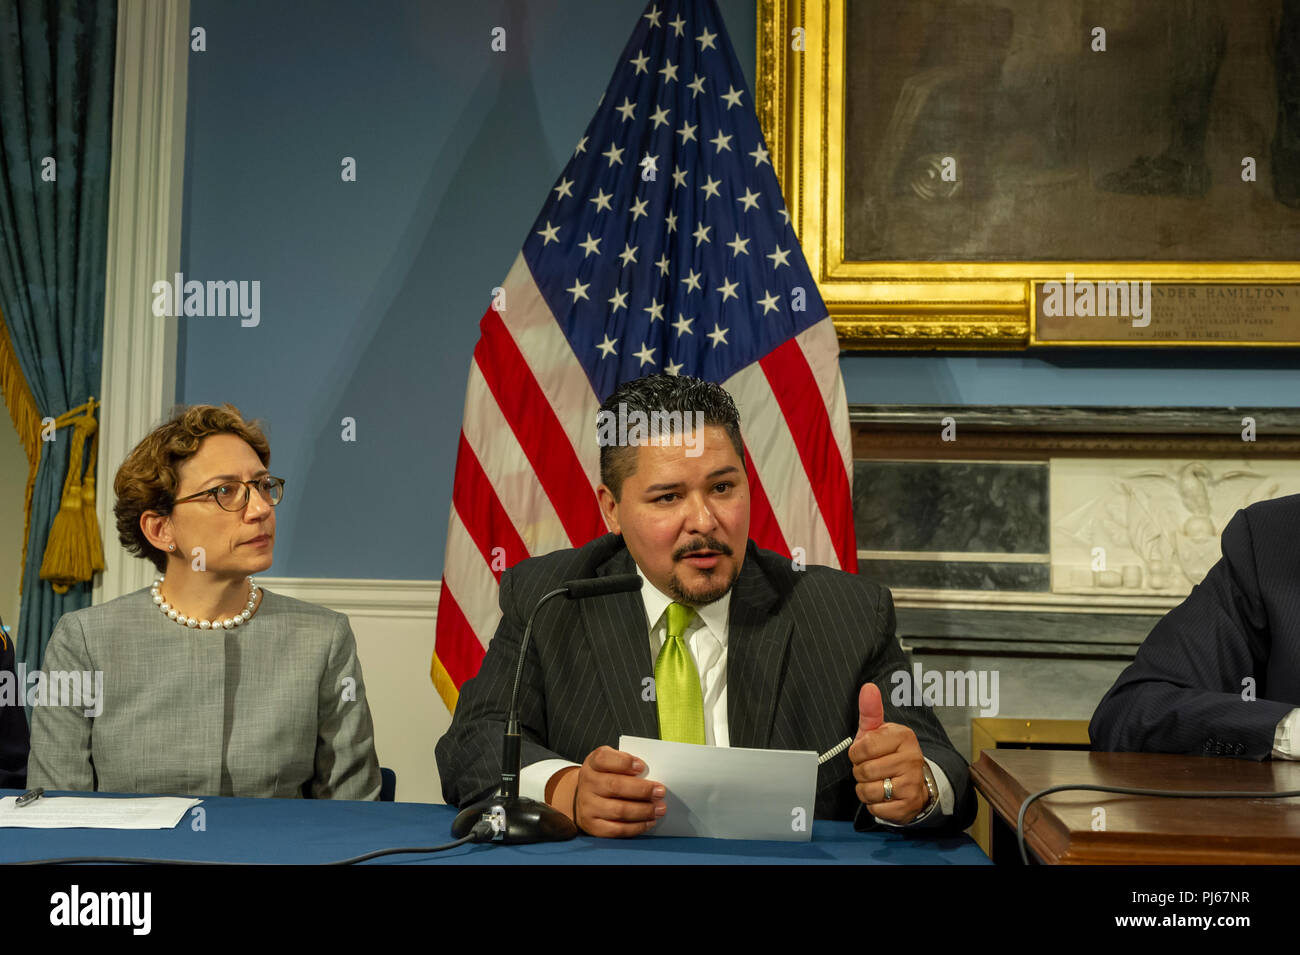 New York Department of Education Schools Chancellor Richard Carranza, speaks at a bill signing for Intro. 1089, which preserves and expands the use of speed cameras near schools where speeding is prevalent in the Blue Room in New York City Hall, on Tuesday September 4, 2018 in New York. (Â© Frances M. Roberts) Credit: Frances Roberts/Alamy Live News Stock Photo